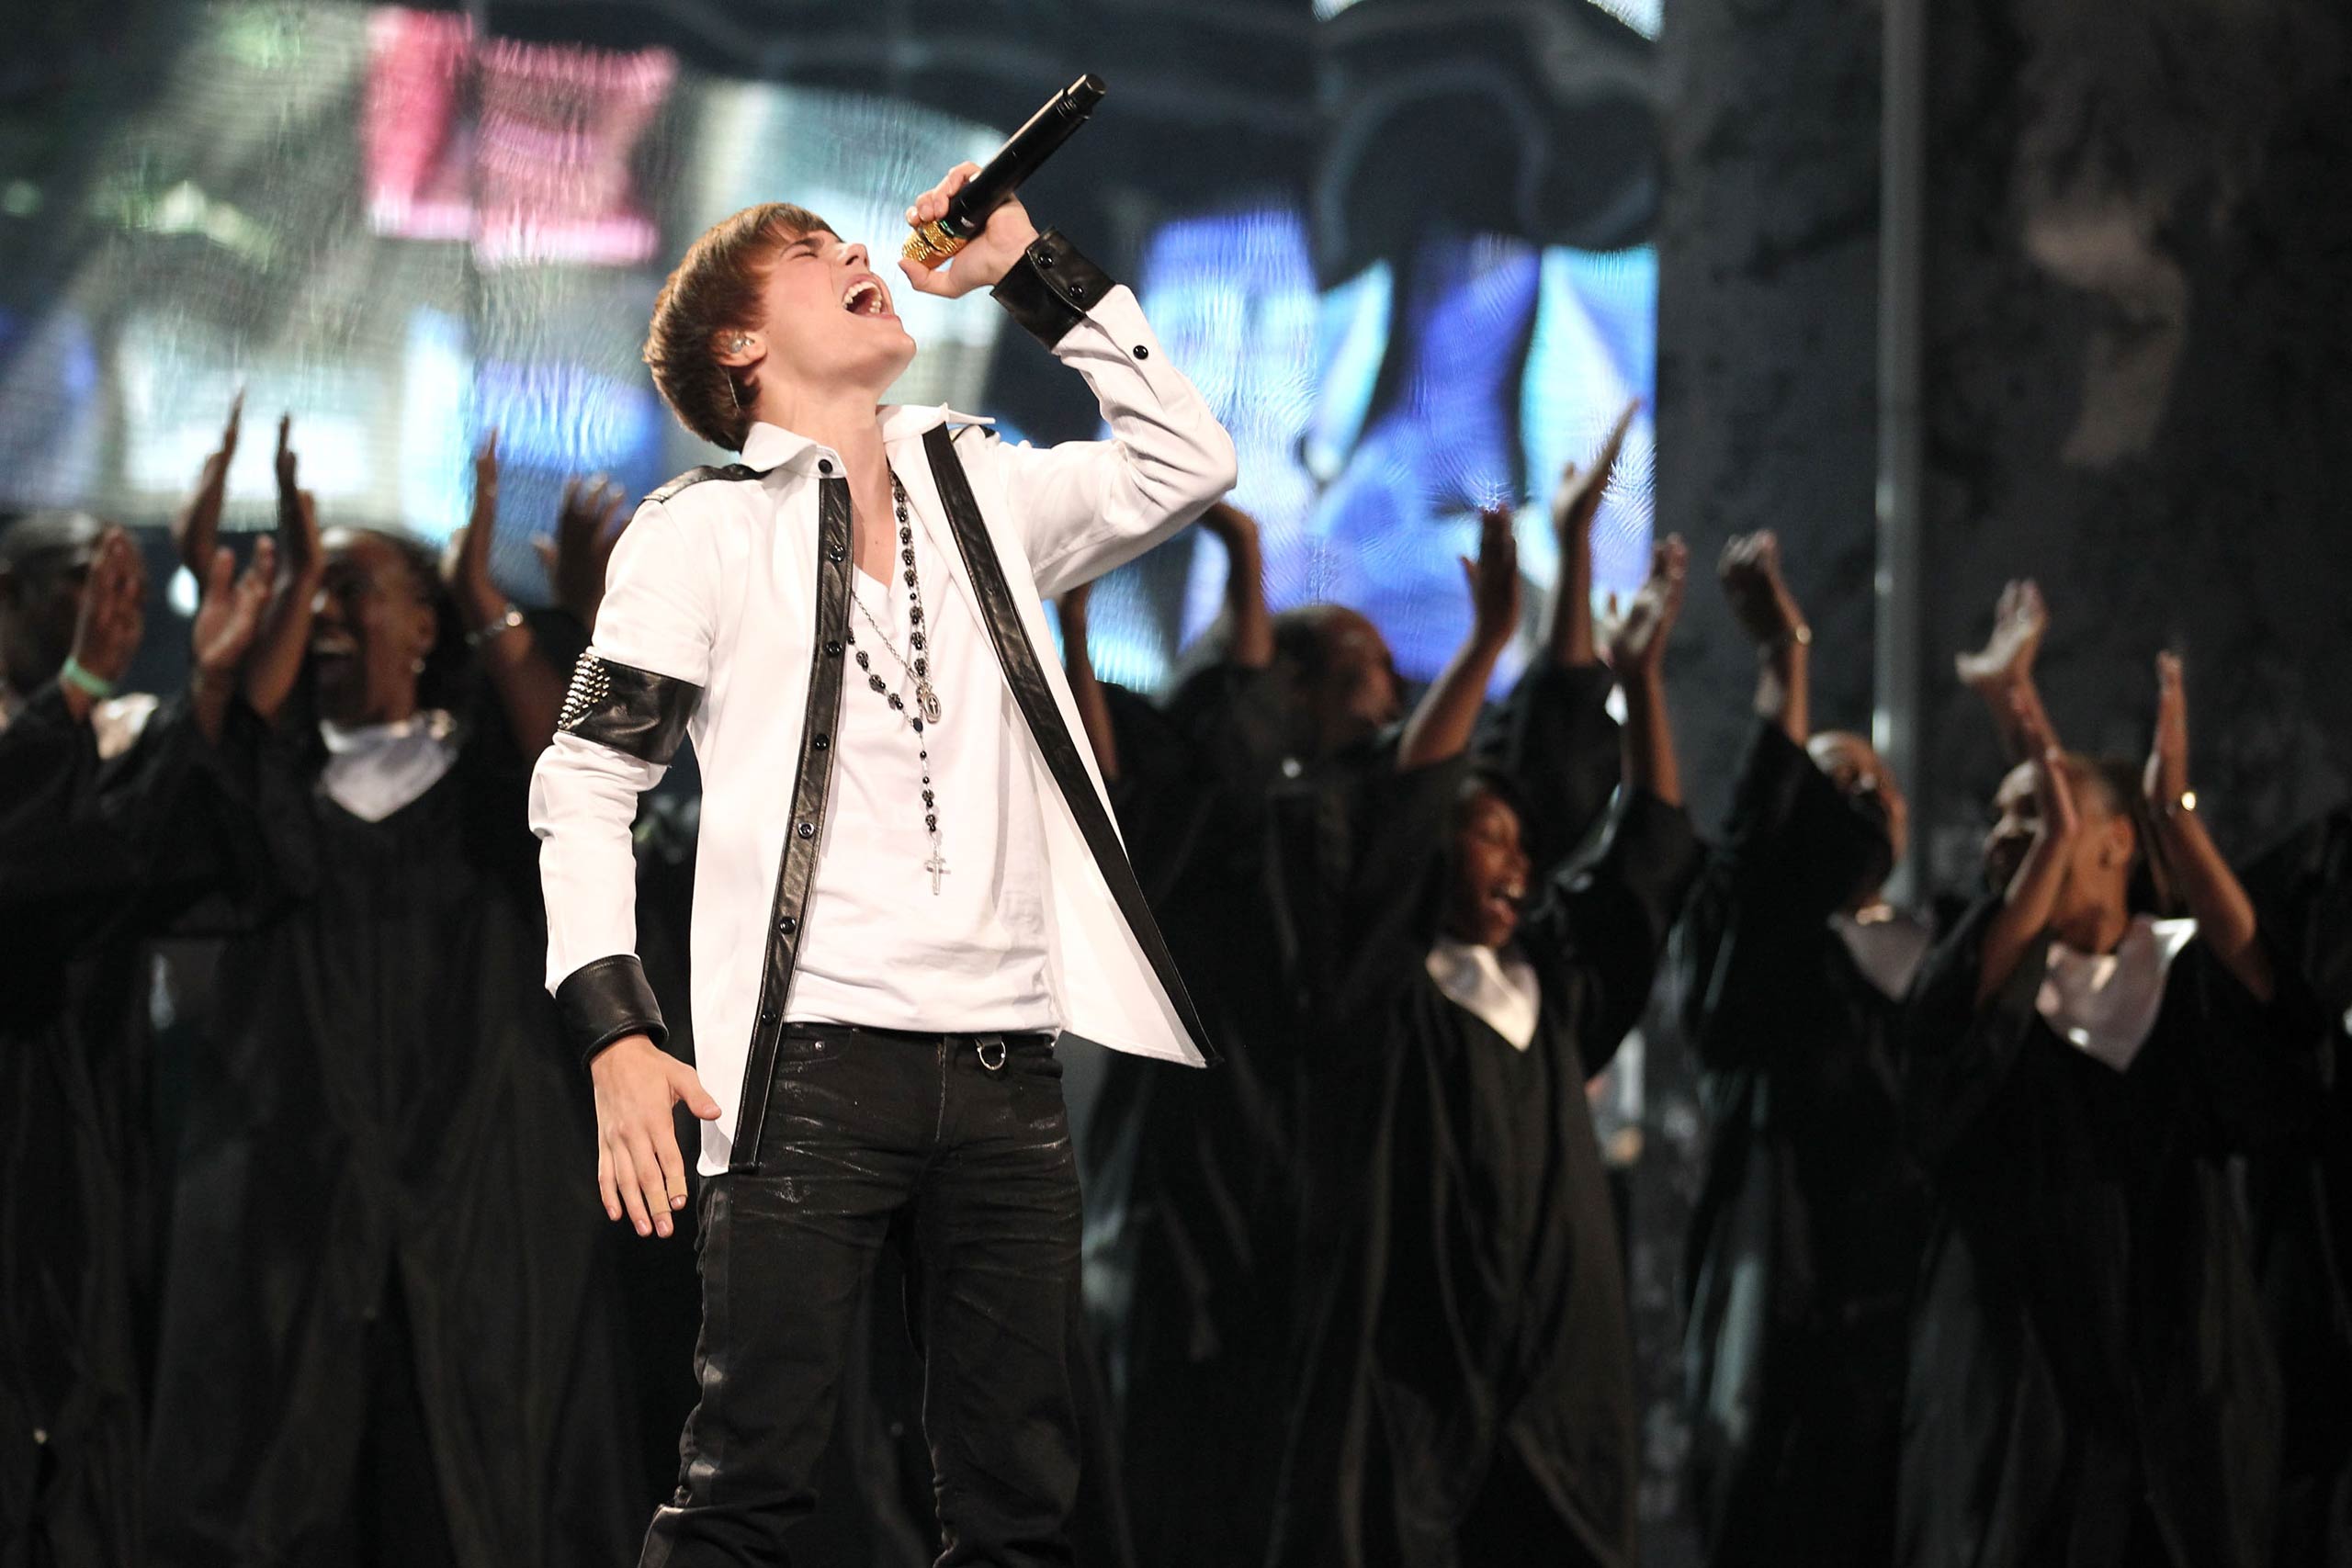 Justin Bieber performs onstage at the 2010 American Music Awards held at Nokia Theatre L.A. Live in Los Angeles, Calif. in 2010.